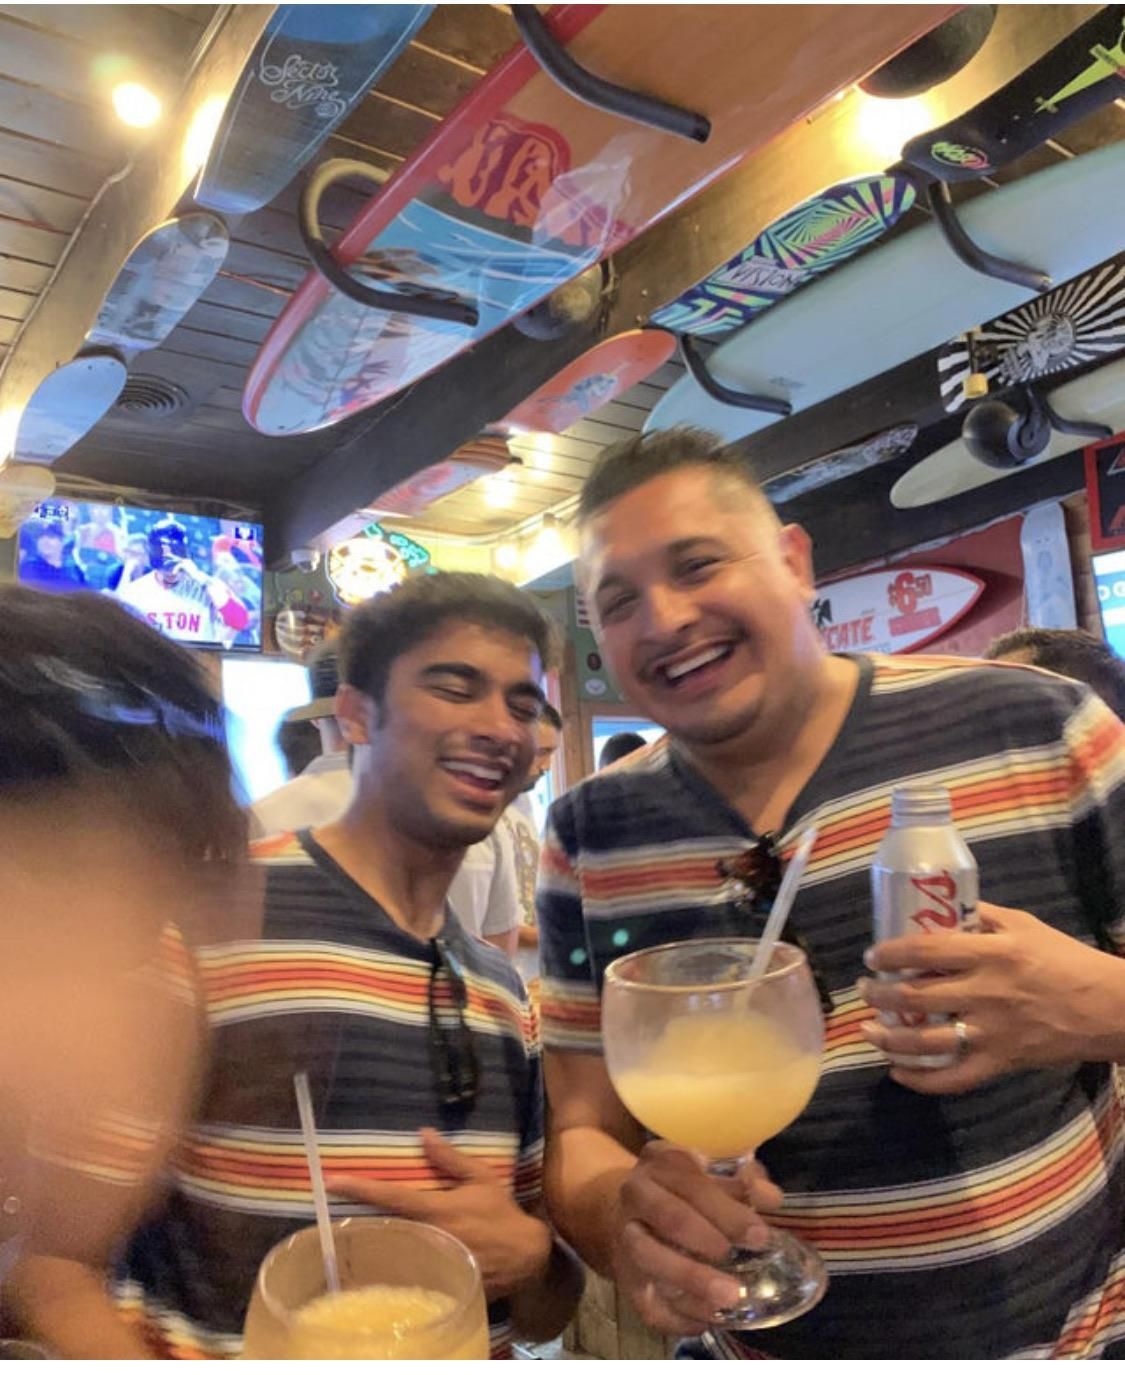 My friend met this guy in a bar in San Diego wearing the same T-shirt and drinking the exact same ***tail!!! What are the odds?